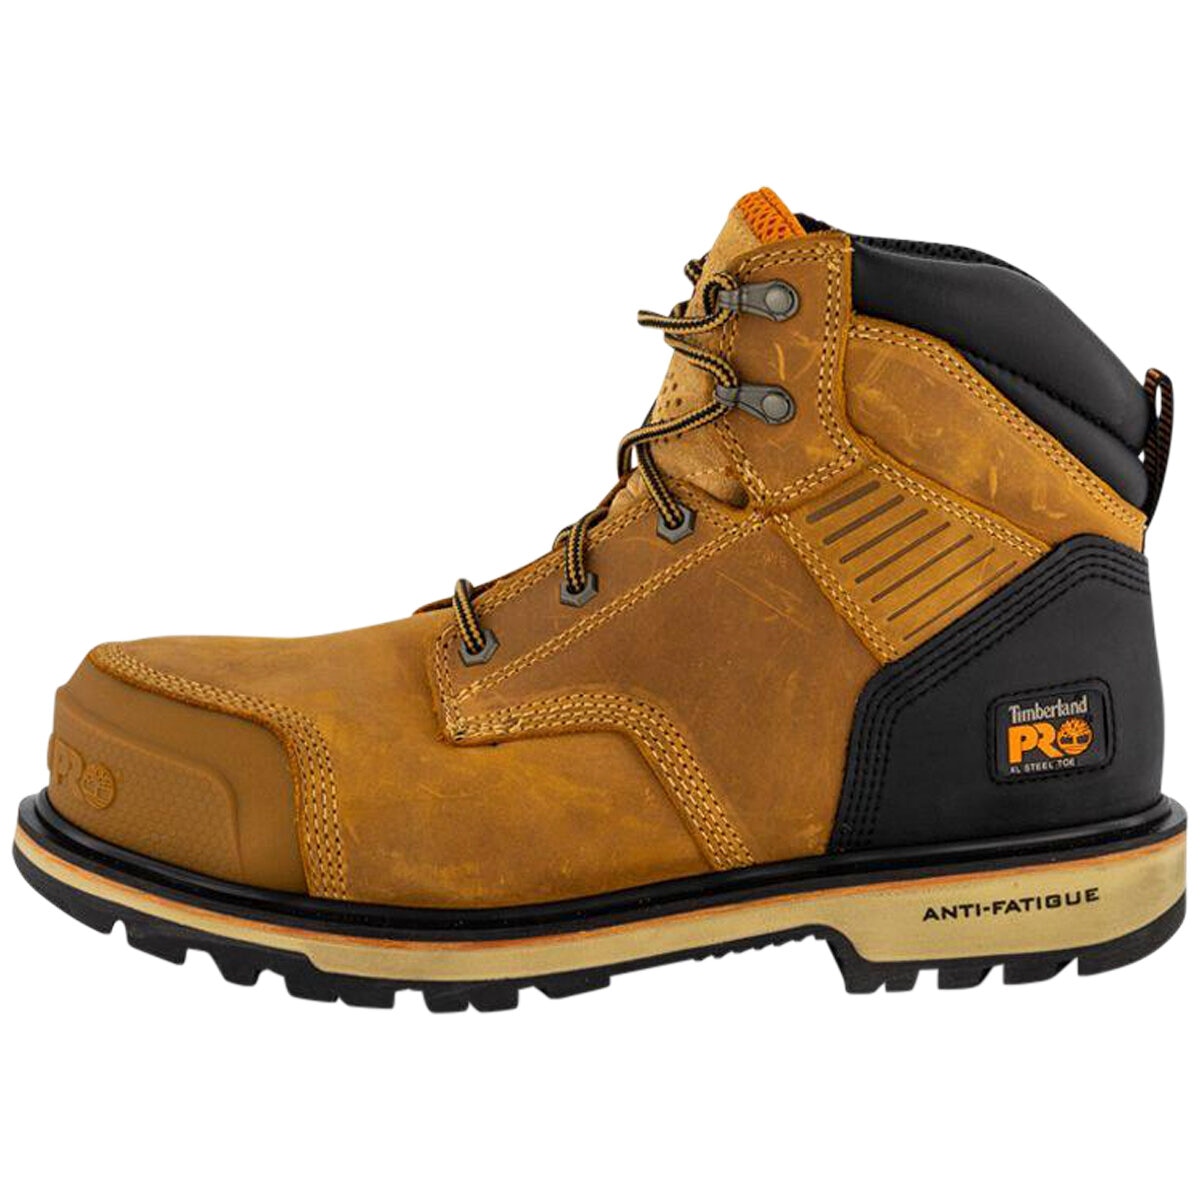 Timberland Pros Steel Cap Boots